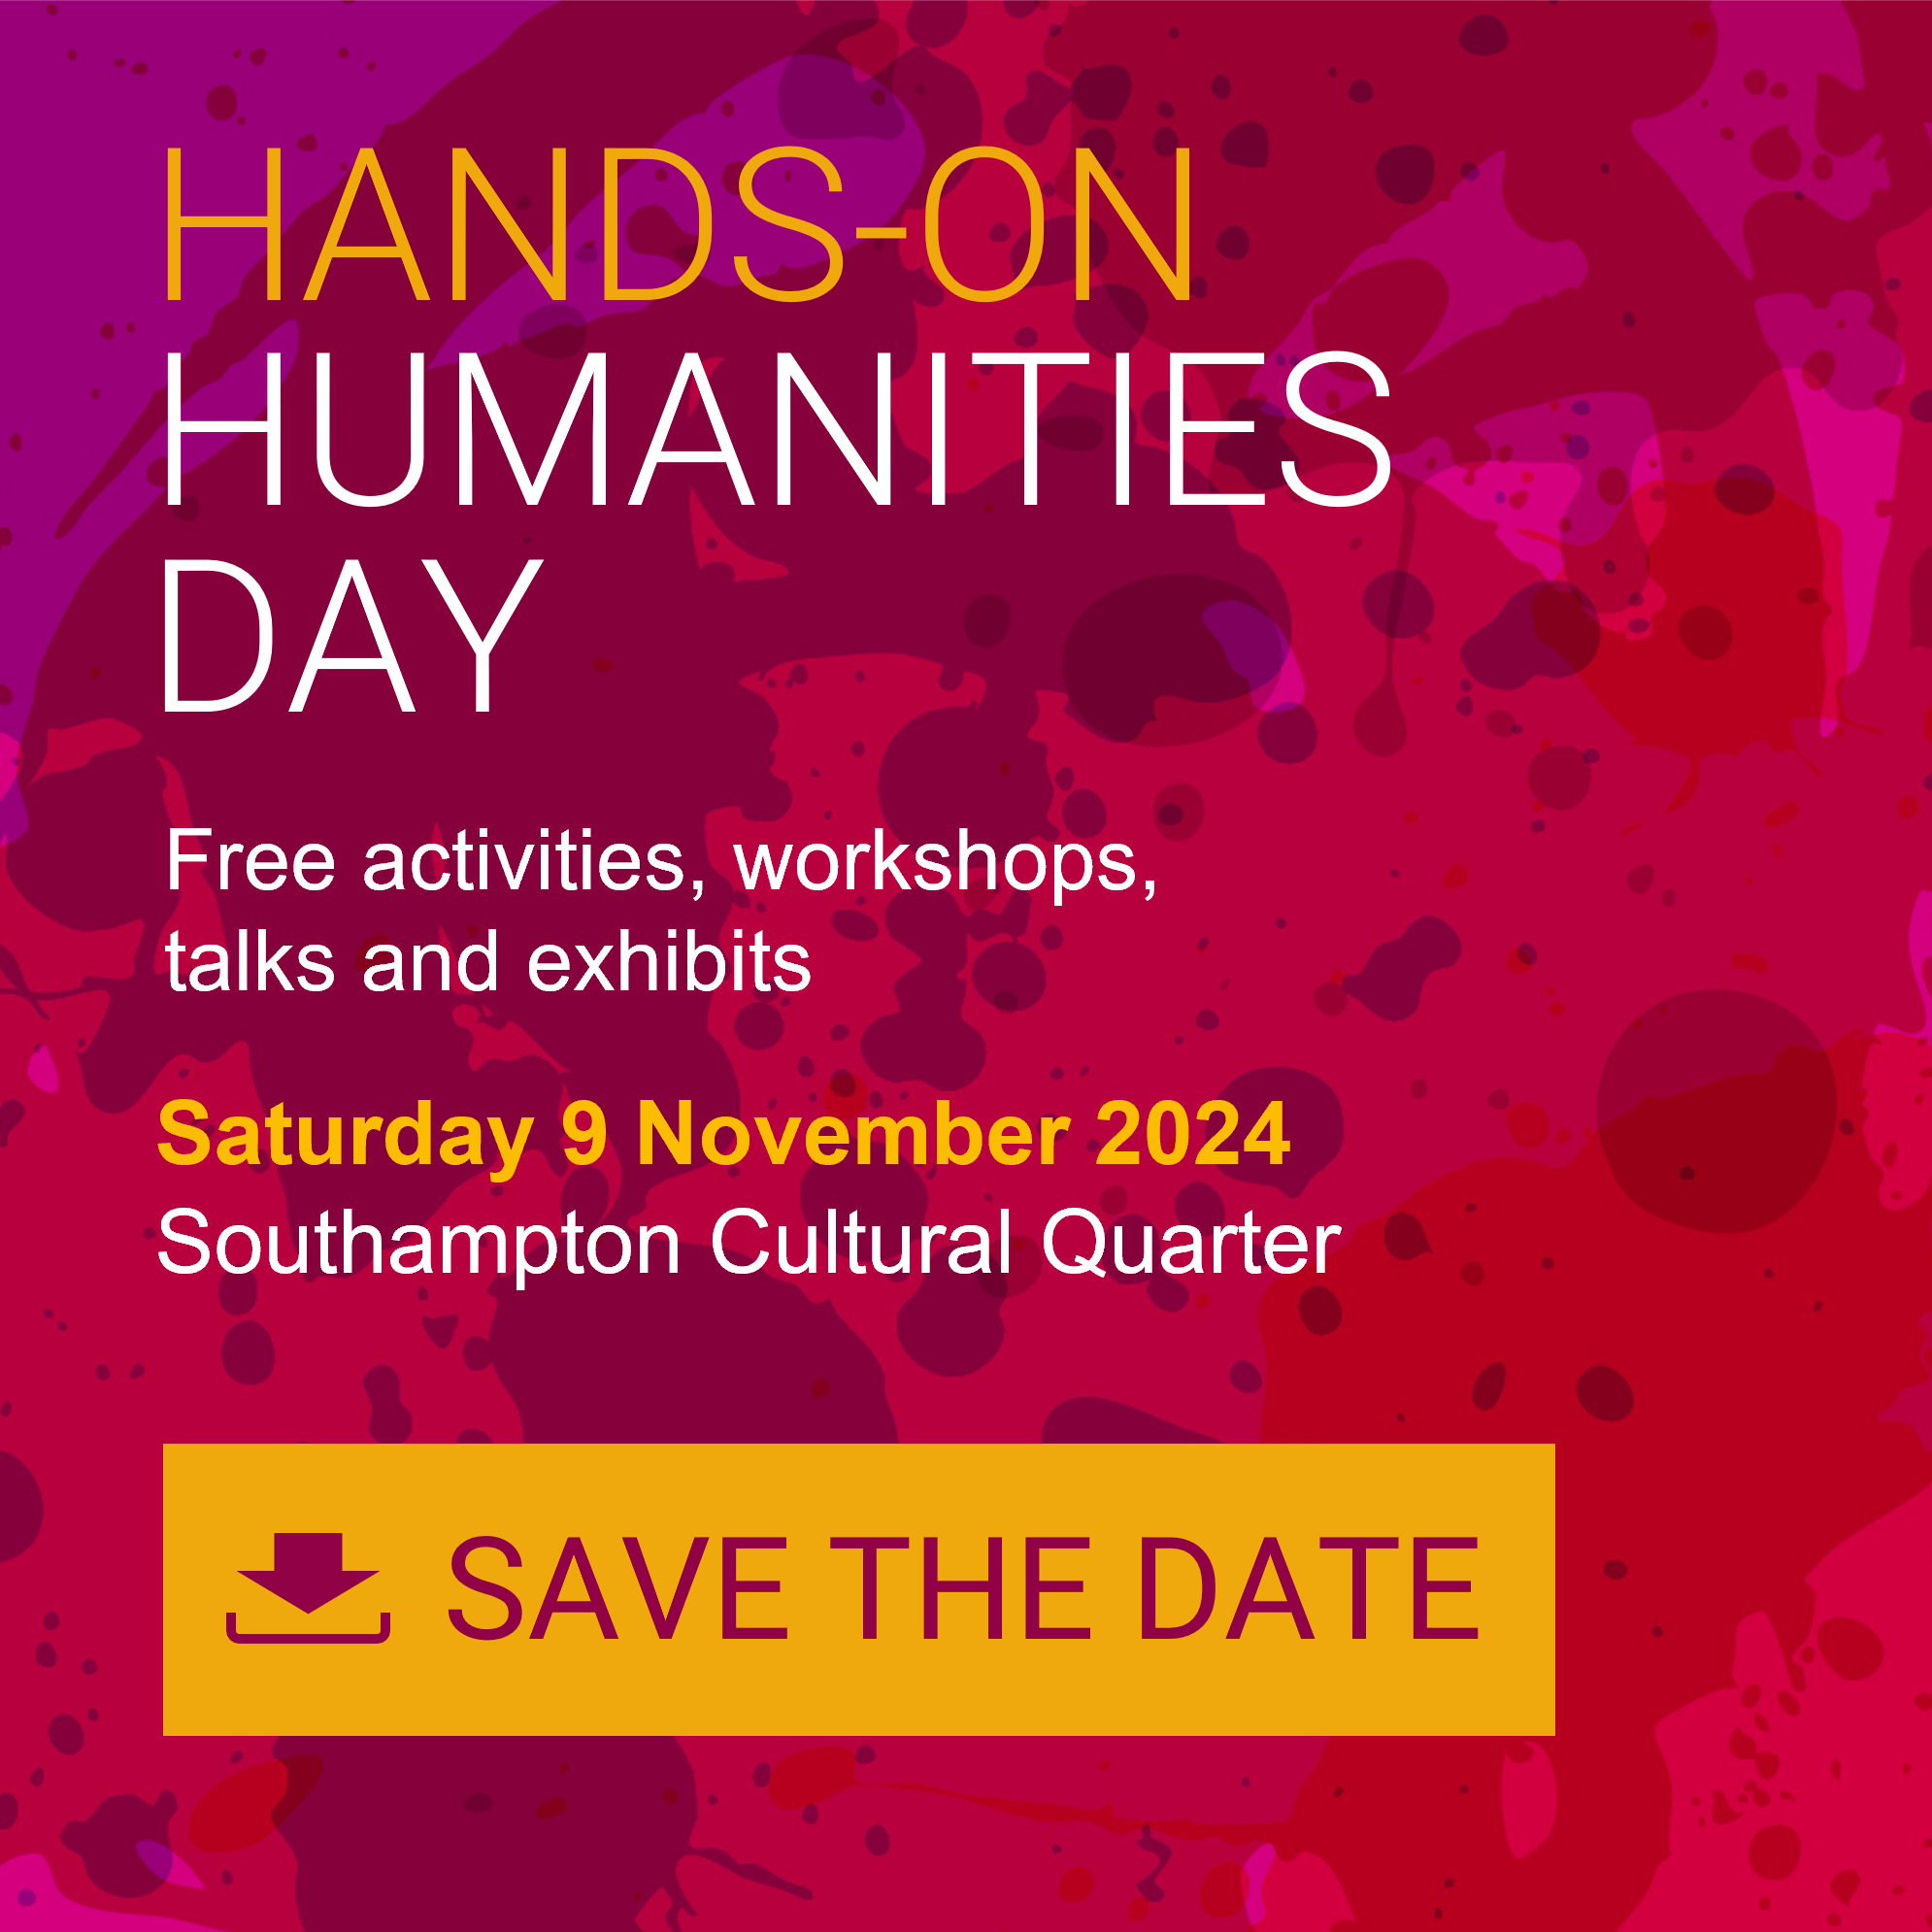 Interactive image on a pink background with text that says:
Hands-on Humanities Day
Free activities, workshops, talks and exhibits, Saturday 9 November 2024, Southampton Cultural Quarter, Save The Date.
Action: you can click on the image to download the calendar file to add the event to your calendar.
